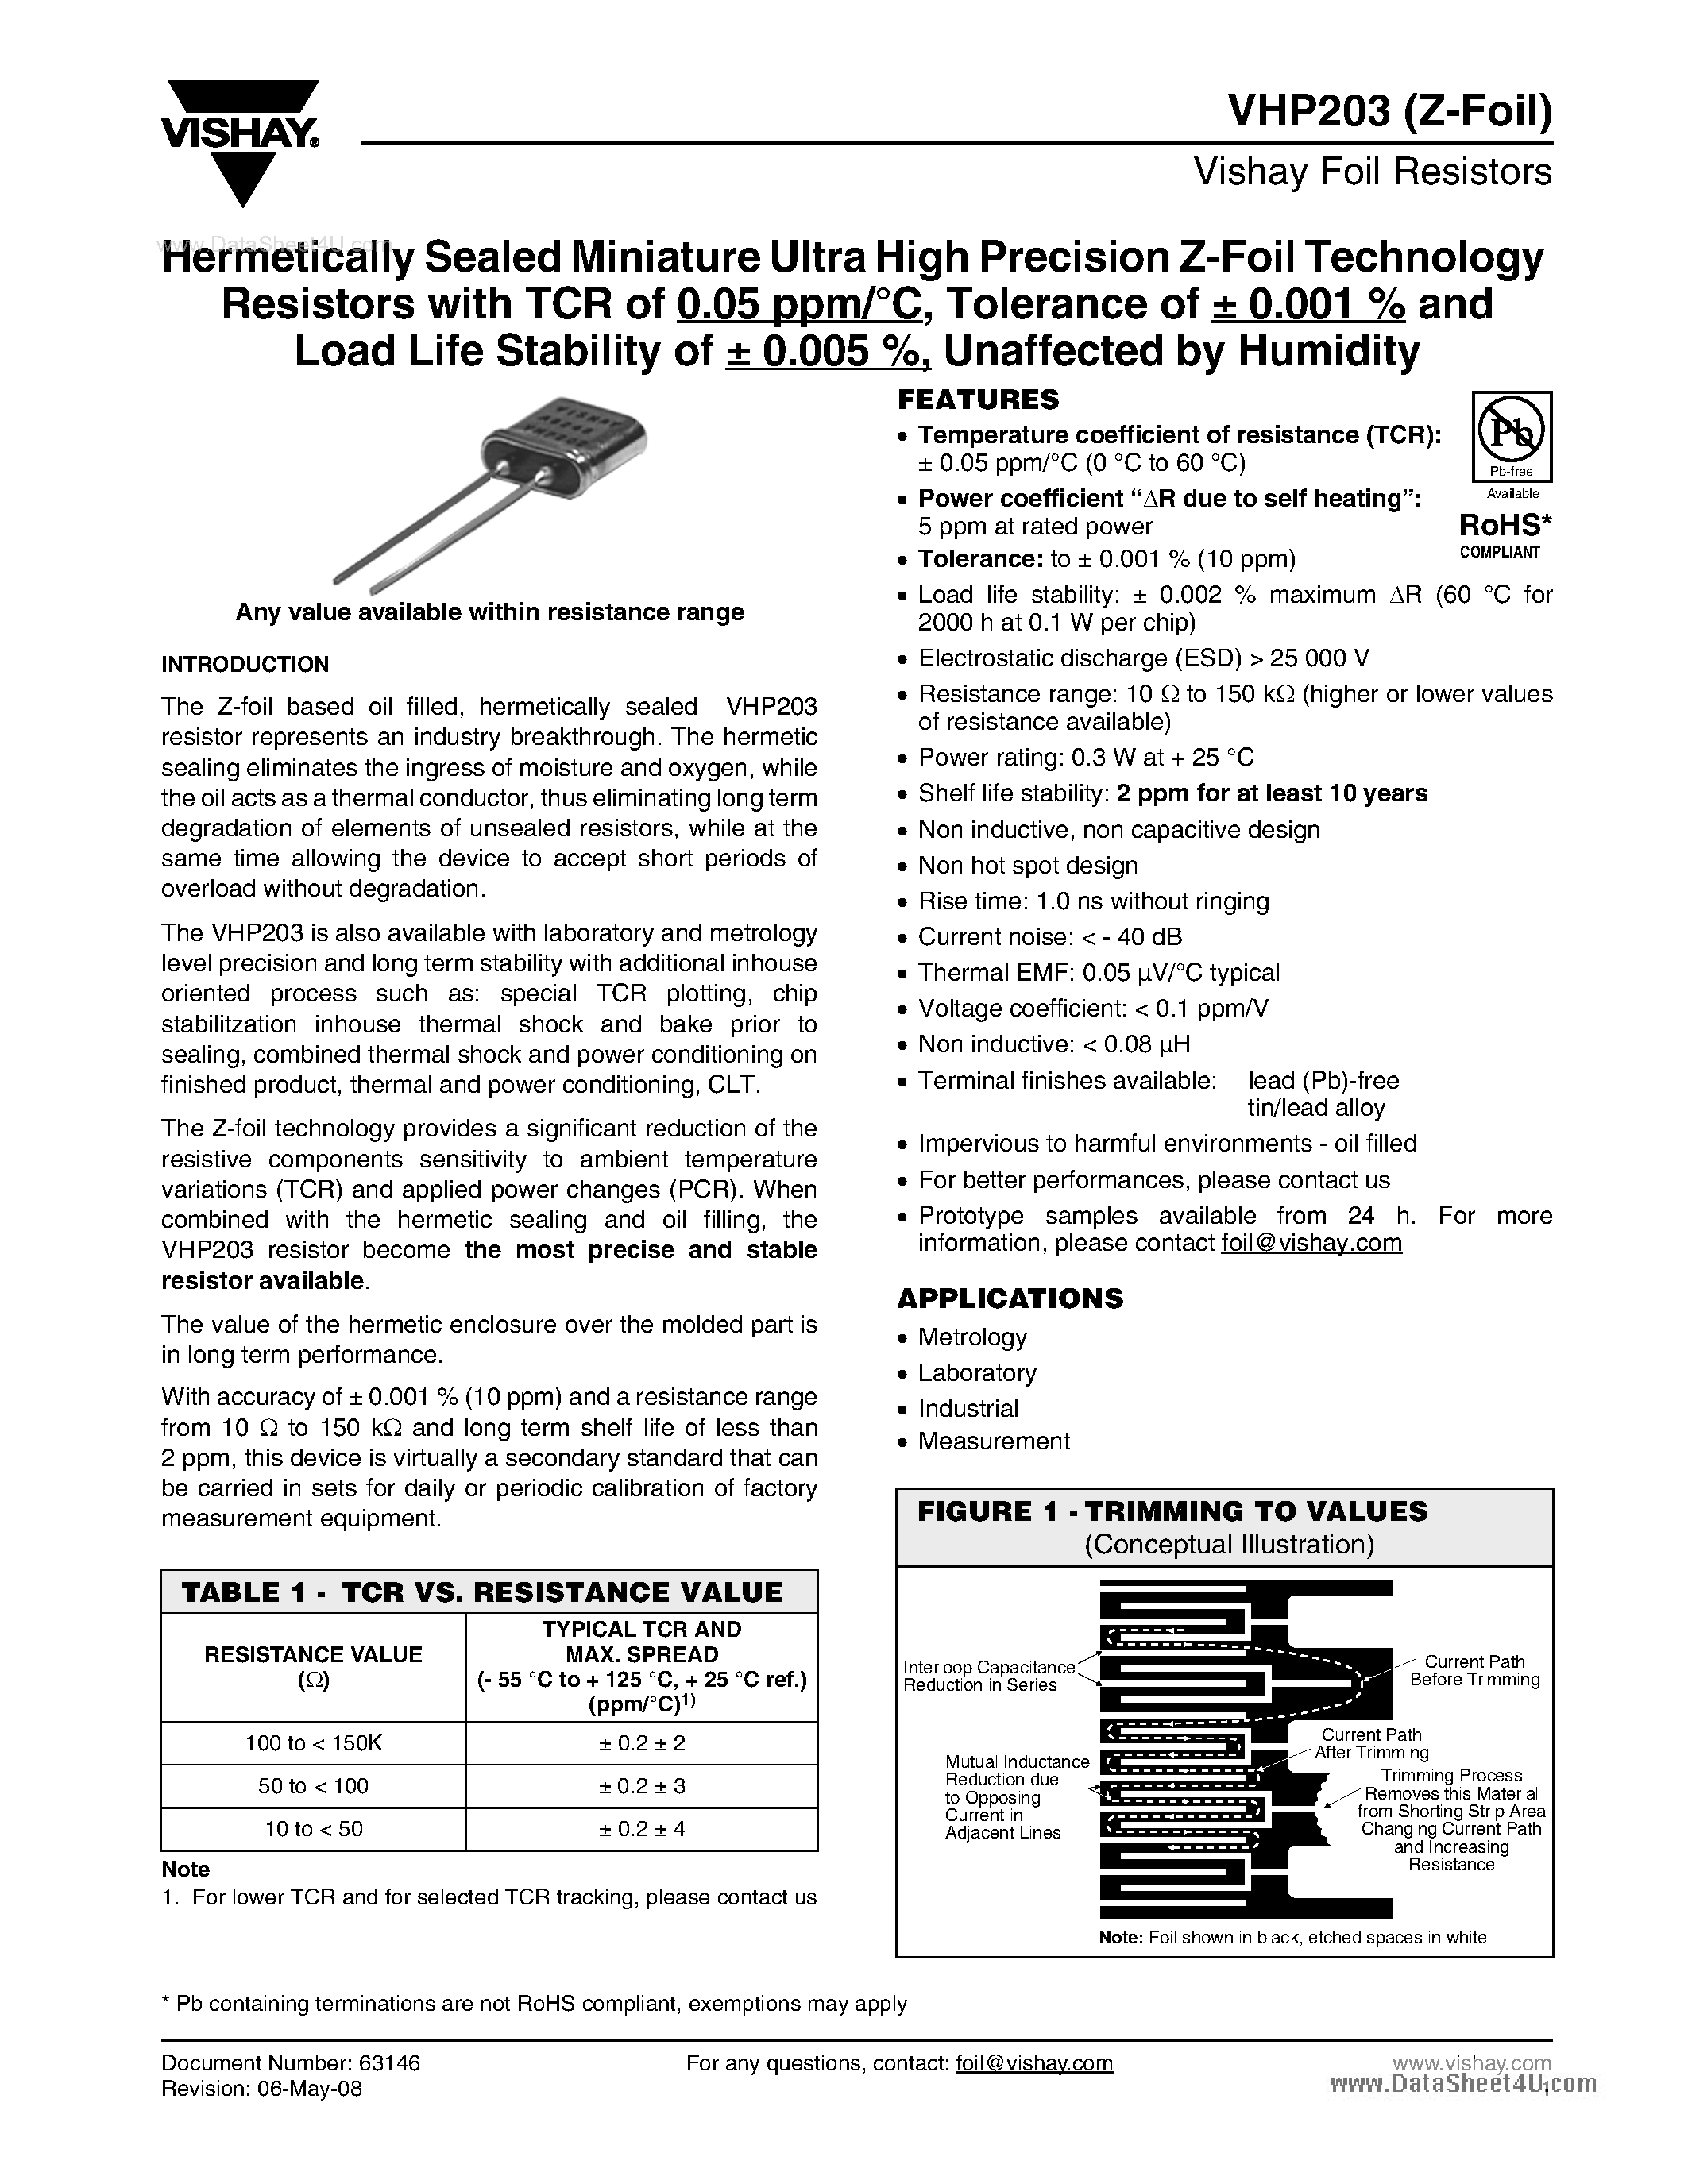 Datasheet VHP203 - Hermetically Sealed Miniature Ultra High Precision Z-Foil Technology page 1